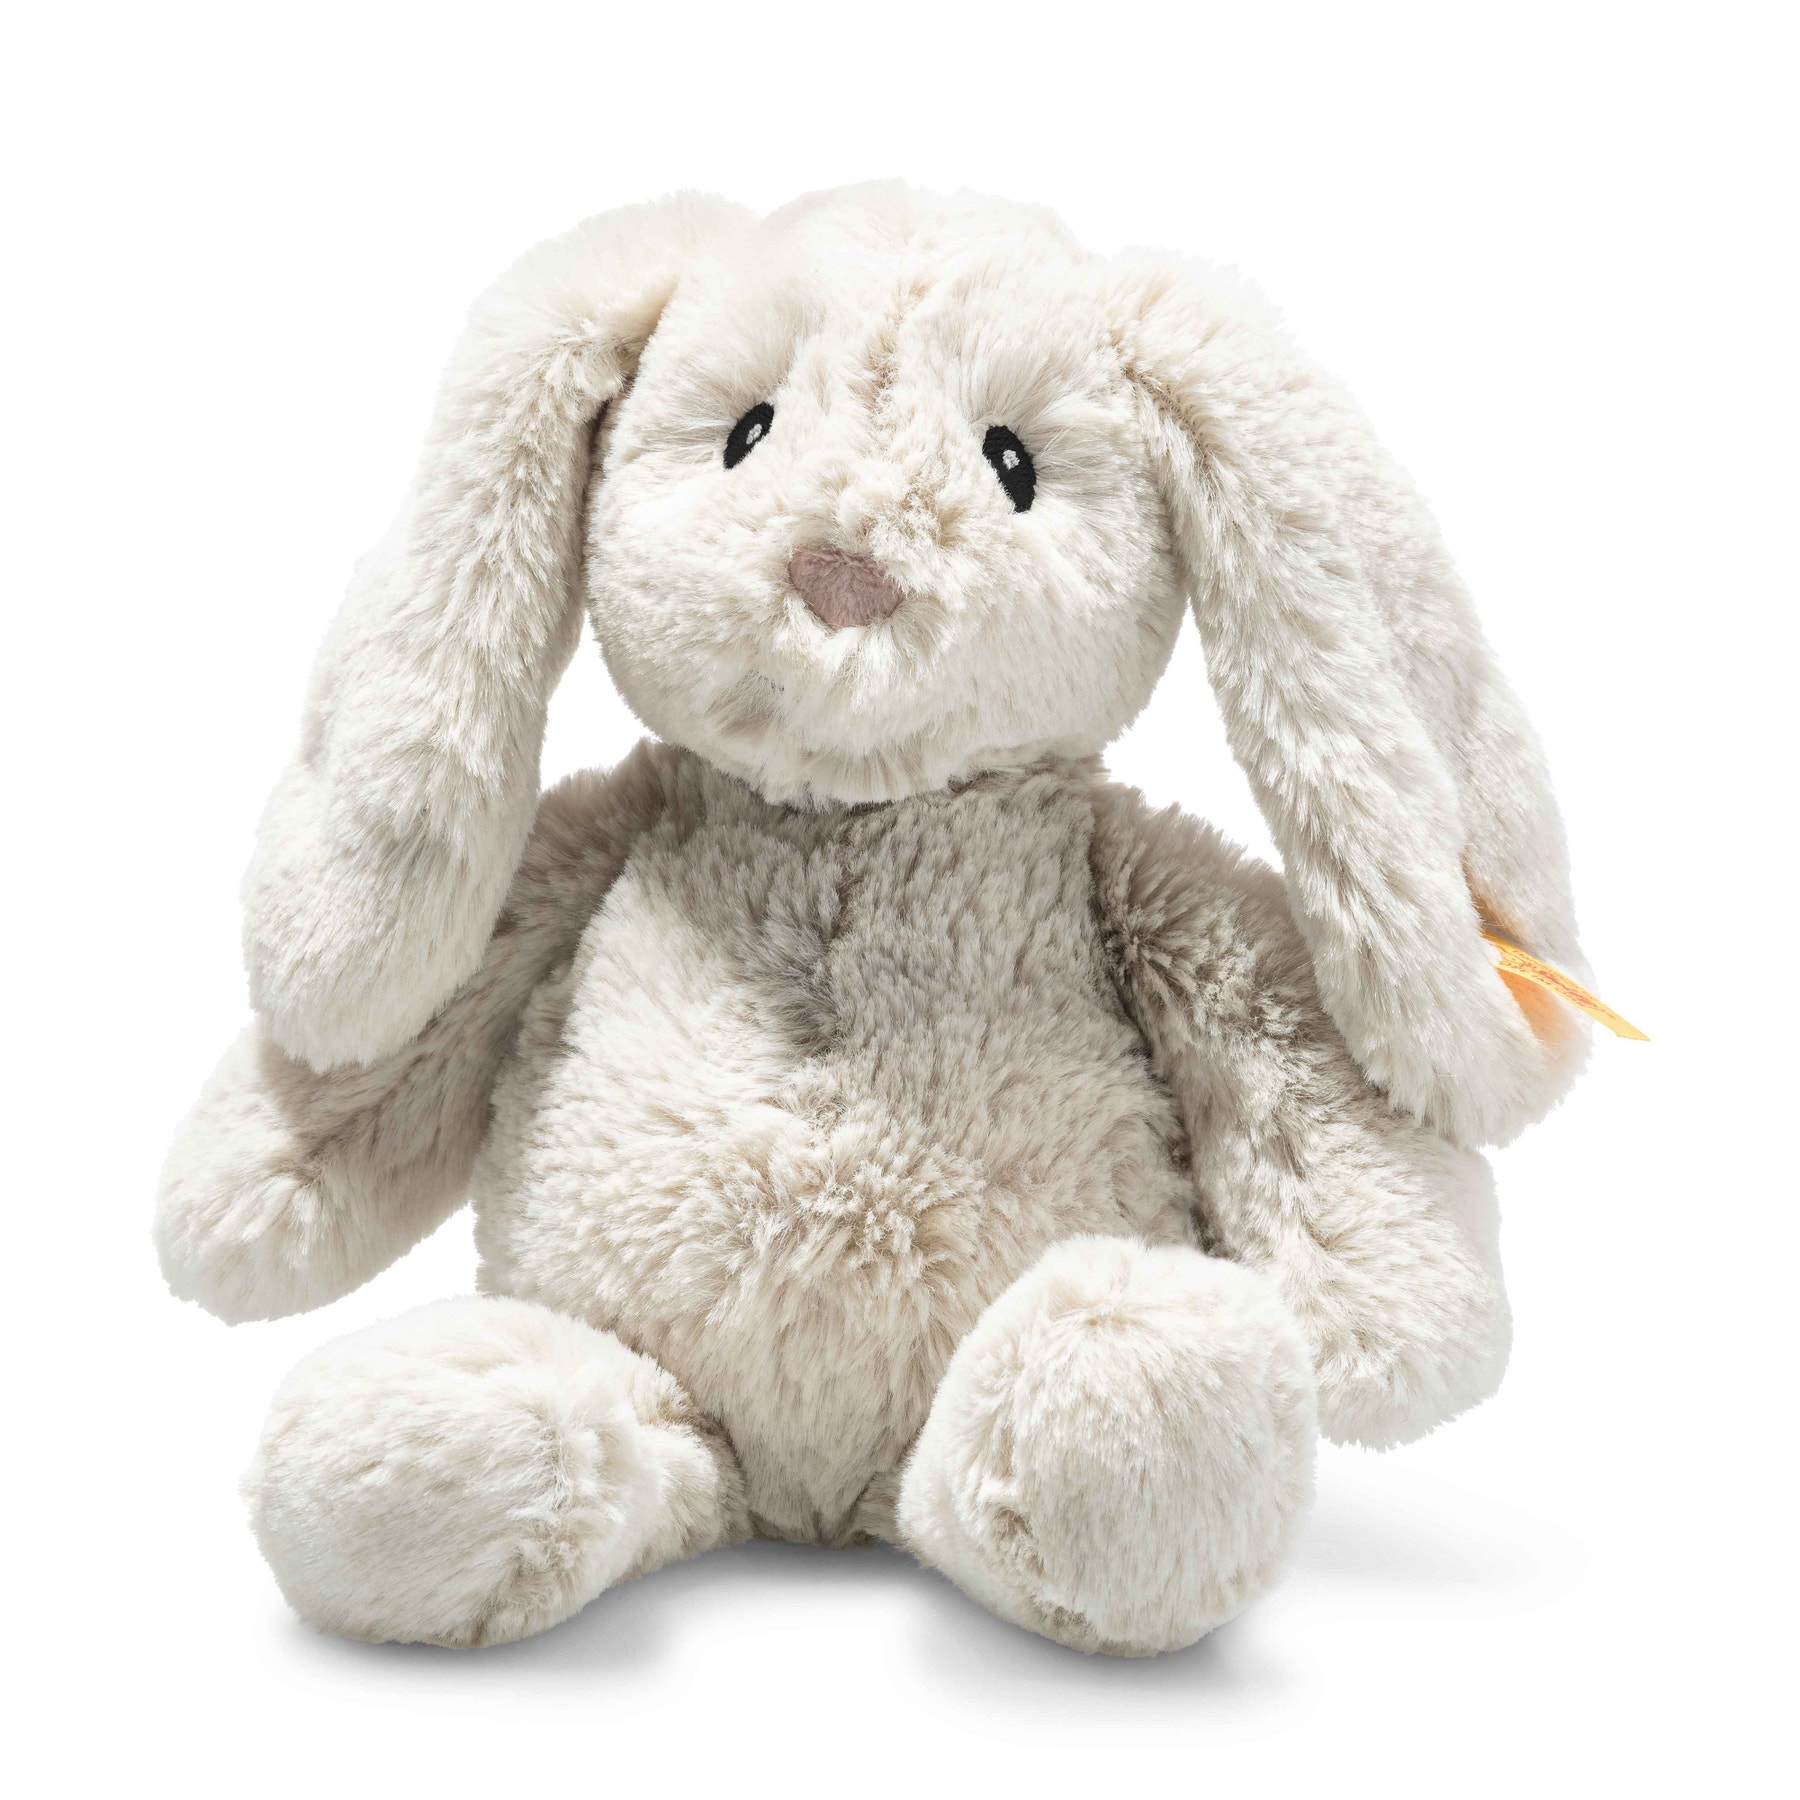 Steiff 080487 Soft Cuddly Friends Hoppie Bunny Large with FREE gift box 